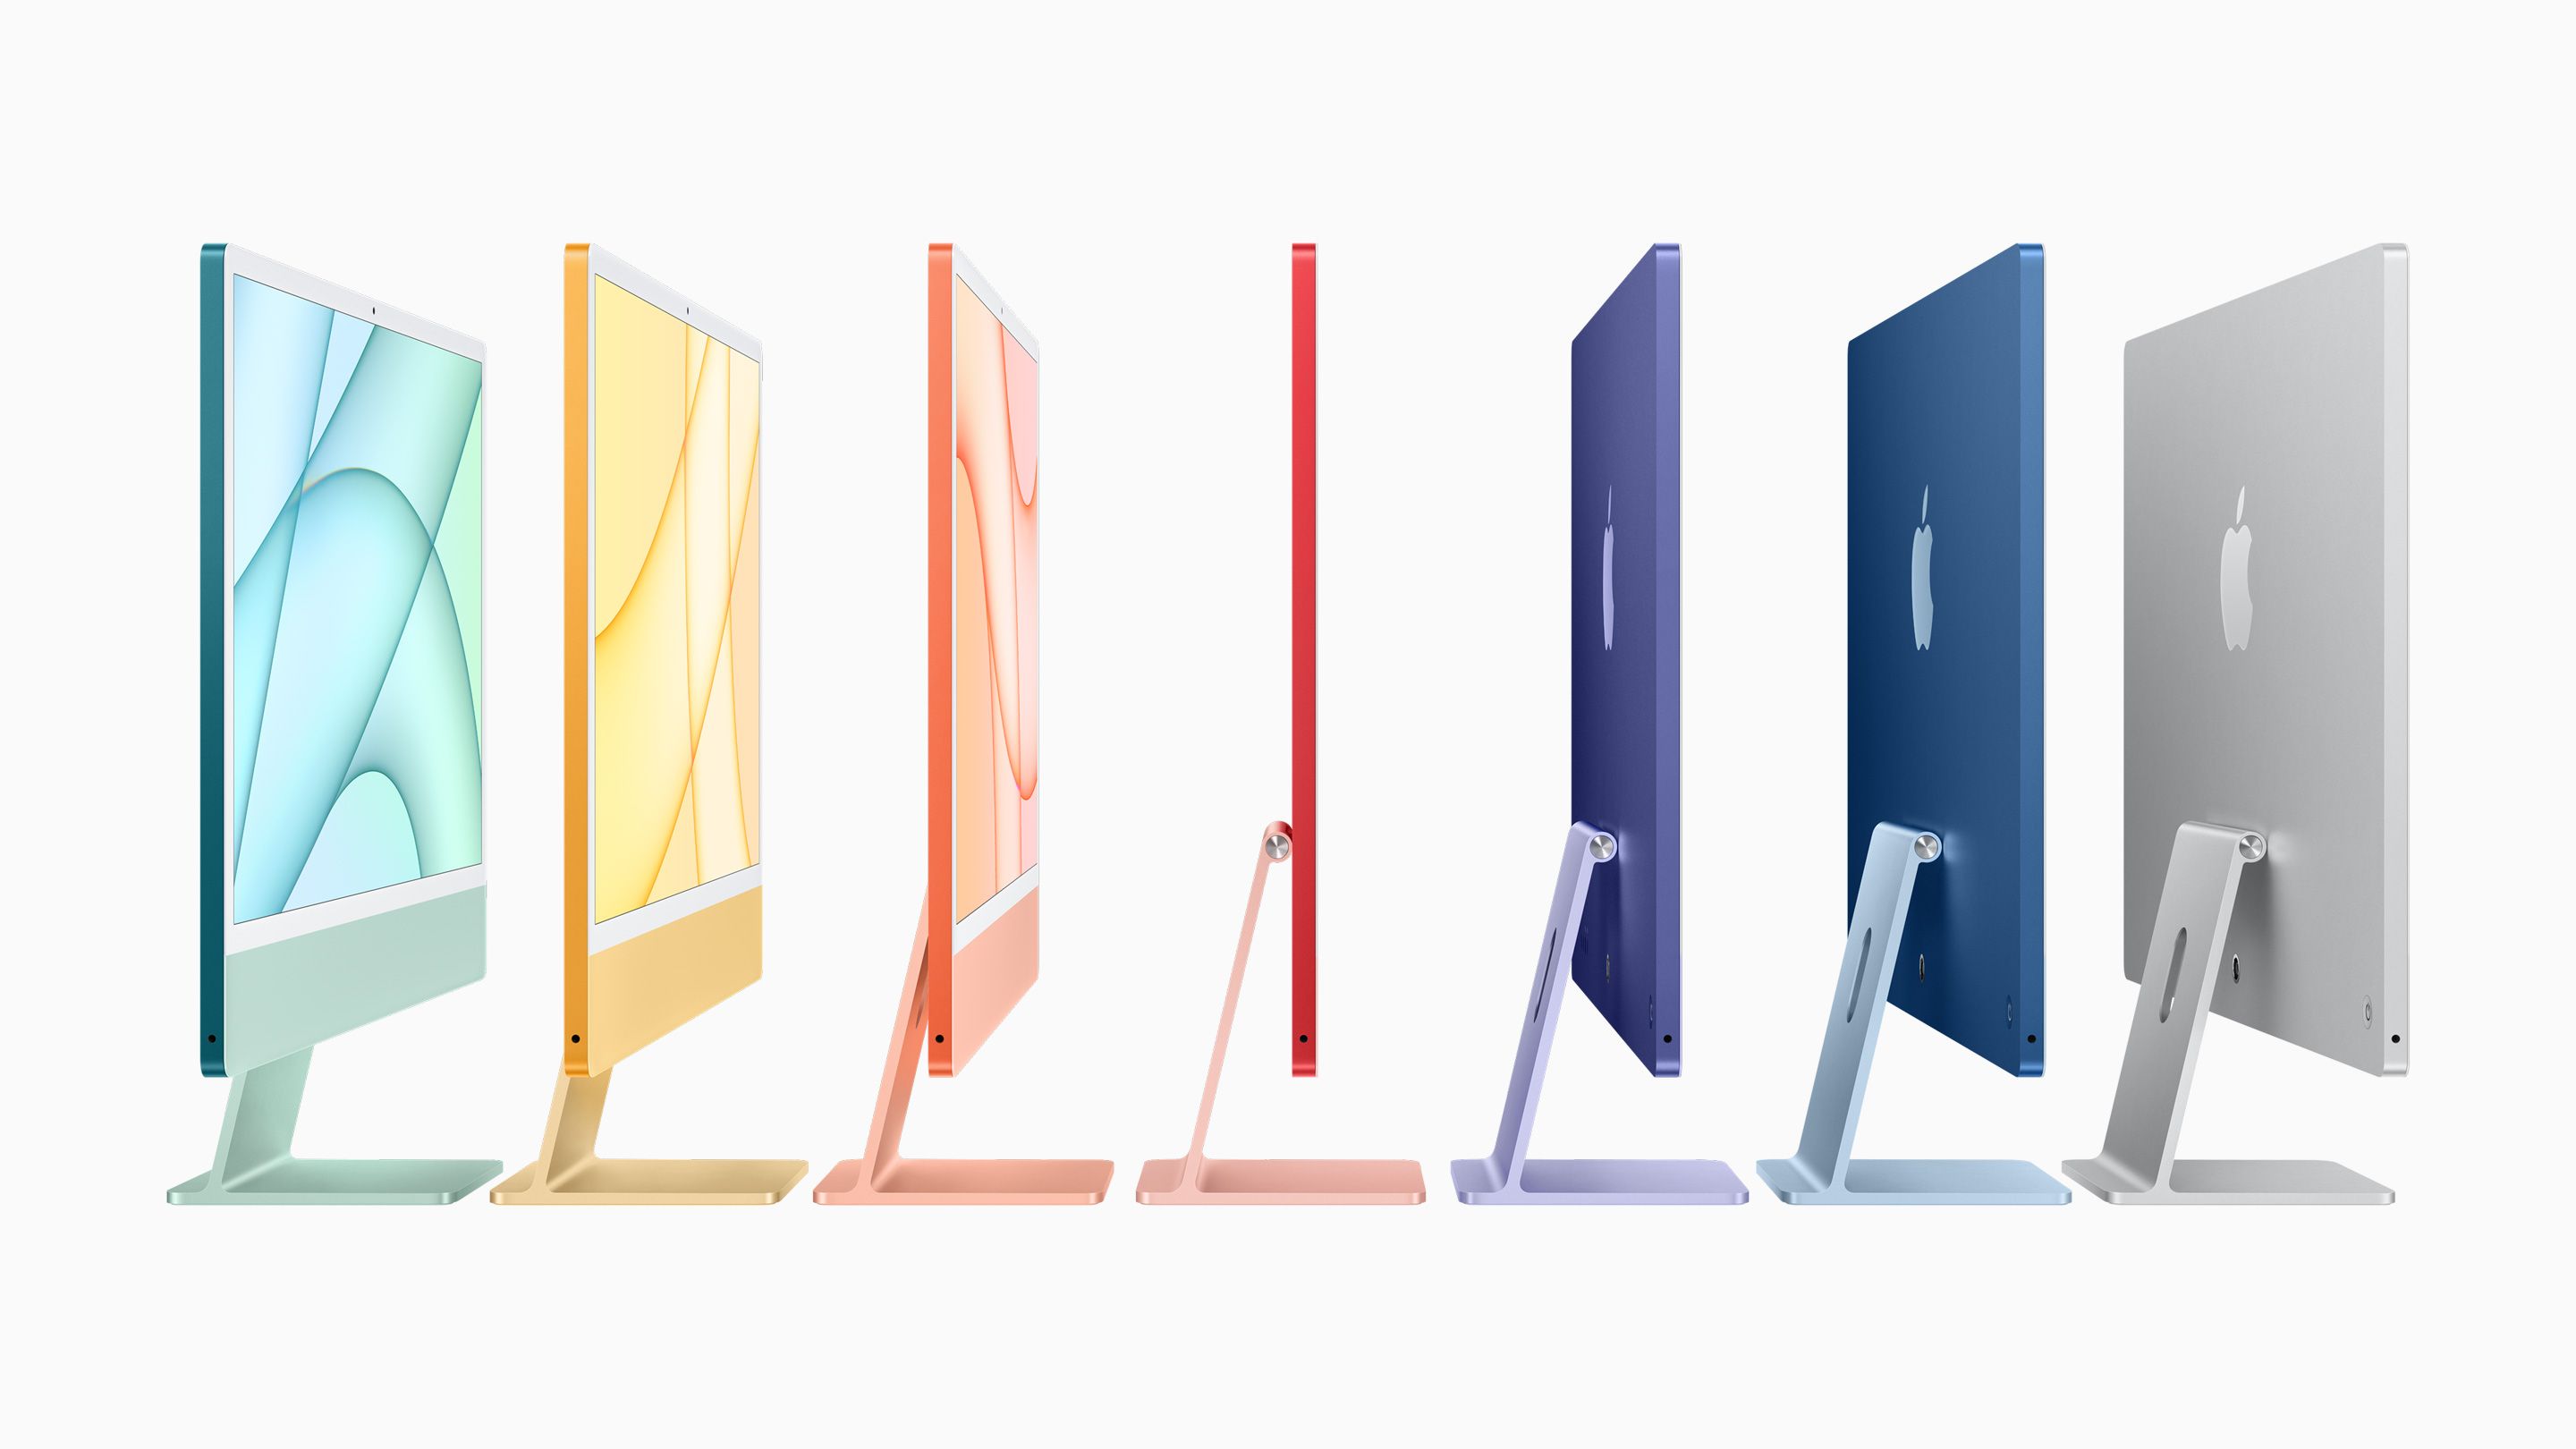 The new iMac in each of the seven new colors